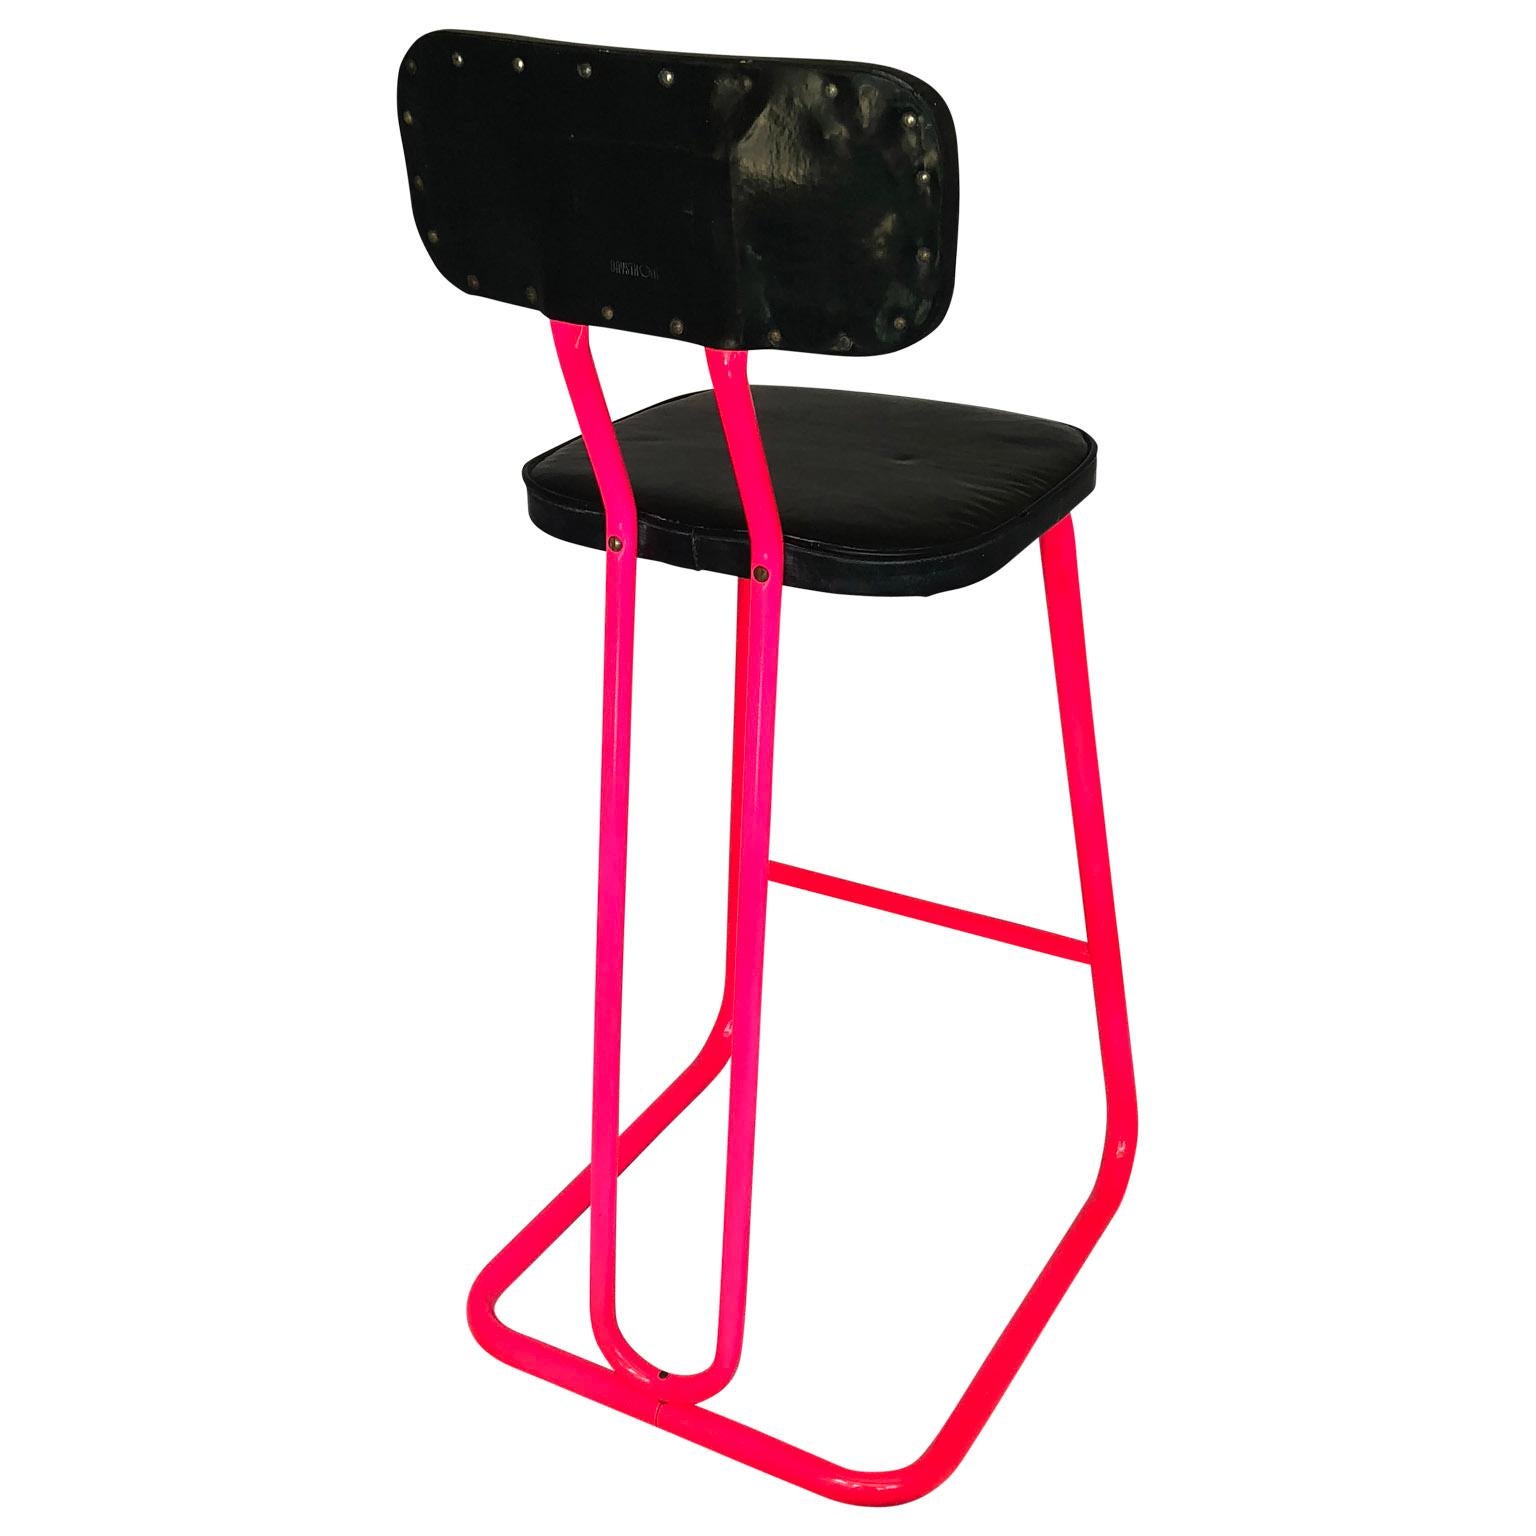 Mid-Century Modern Pink Bar Stool By Daystrom And Knoll In Good Condition For Sale In Haddonfield, NJ